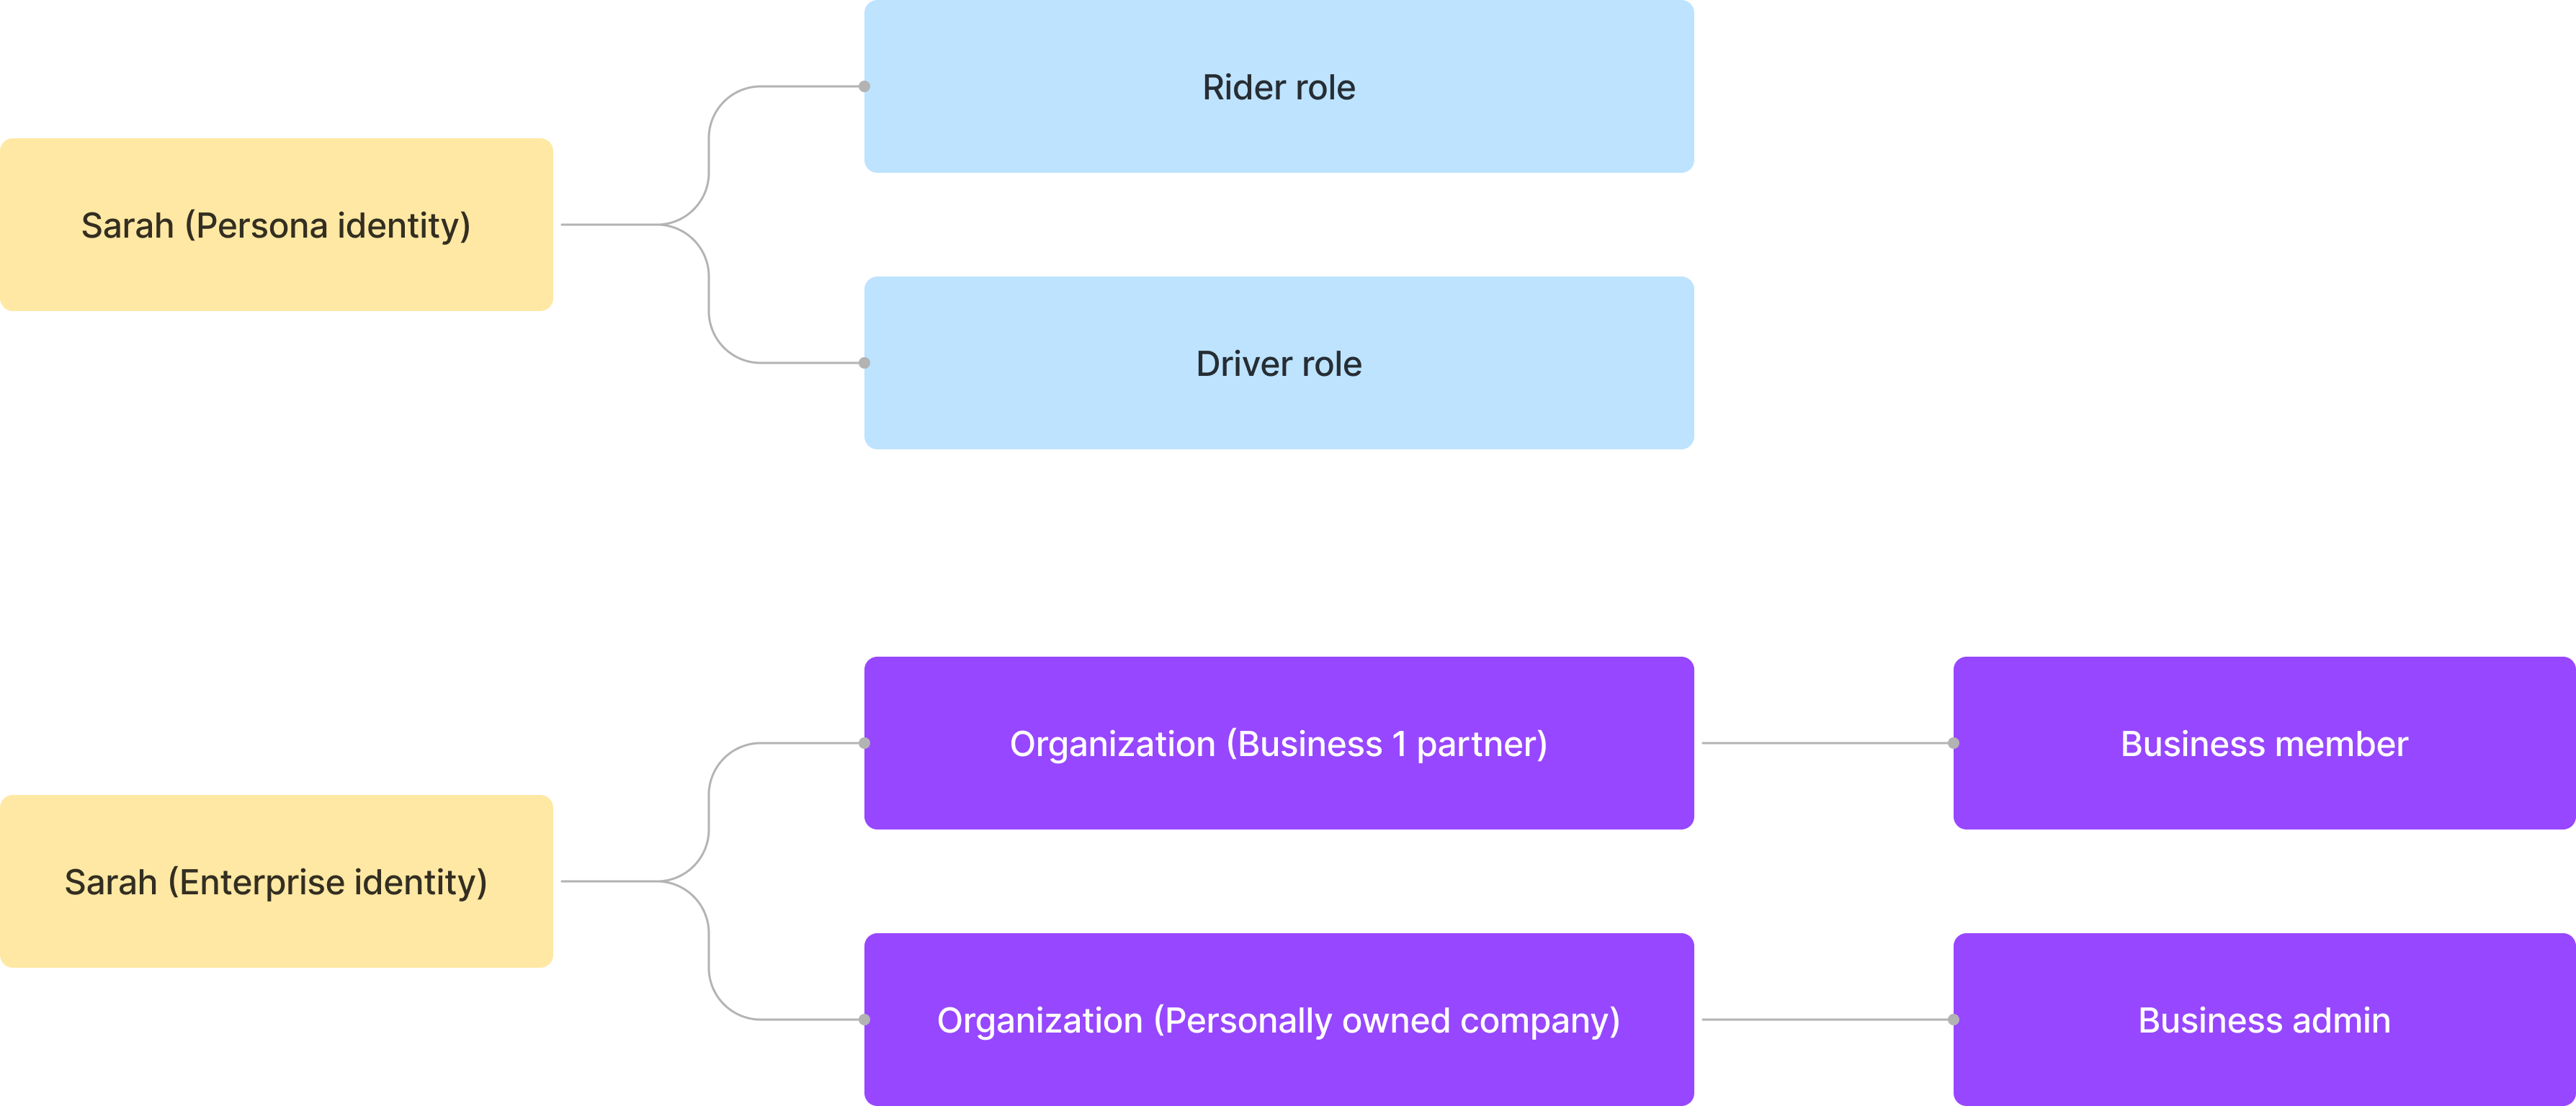 A user’s identity and role map